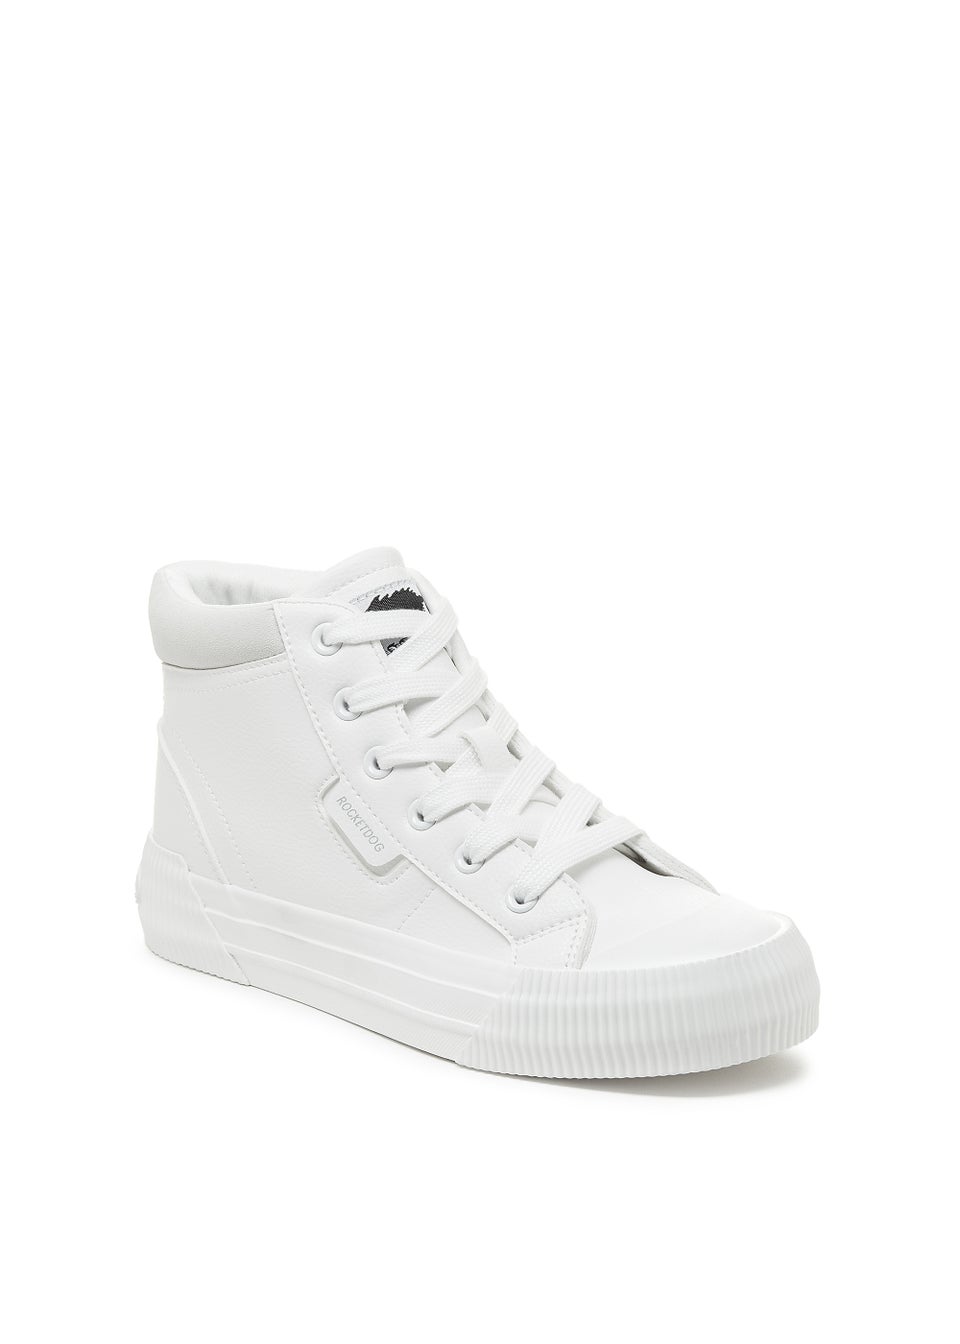 Rocket Dog Cherry White High Top Trainers